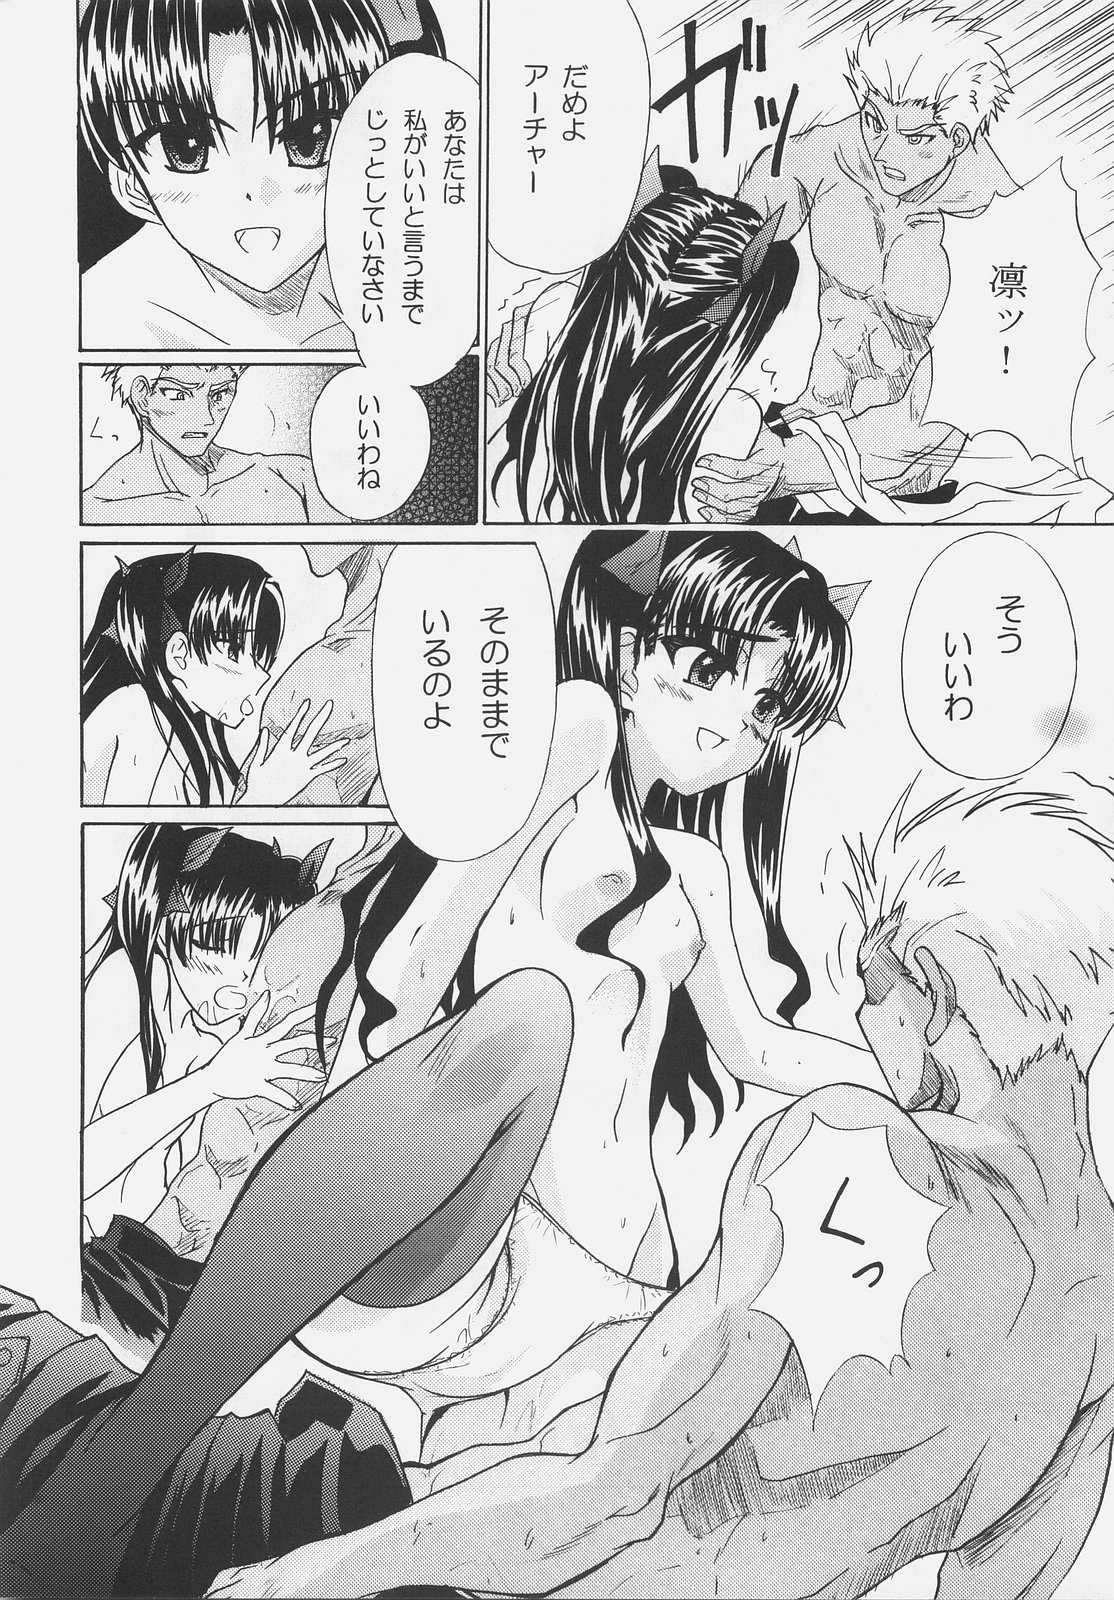 (SC31) [Yuzuriha (Aki, Poso)] Red and Red (Fate/stay night) (サンクリ31) [譲葉 (Aki, ぽそ)] Red and Red (Fate/stay night)